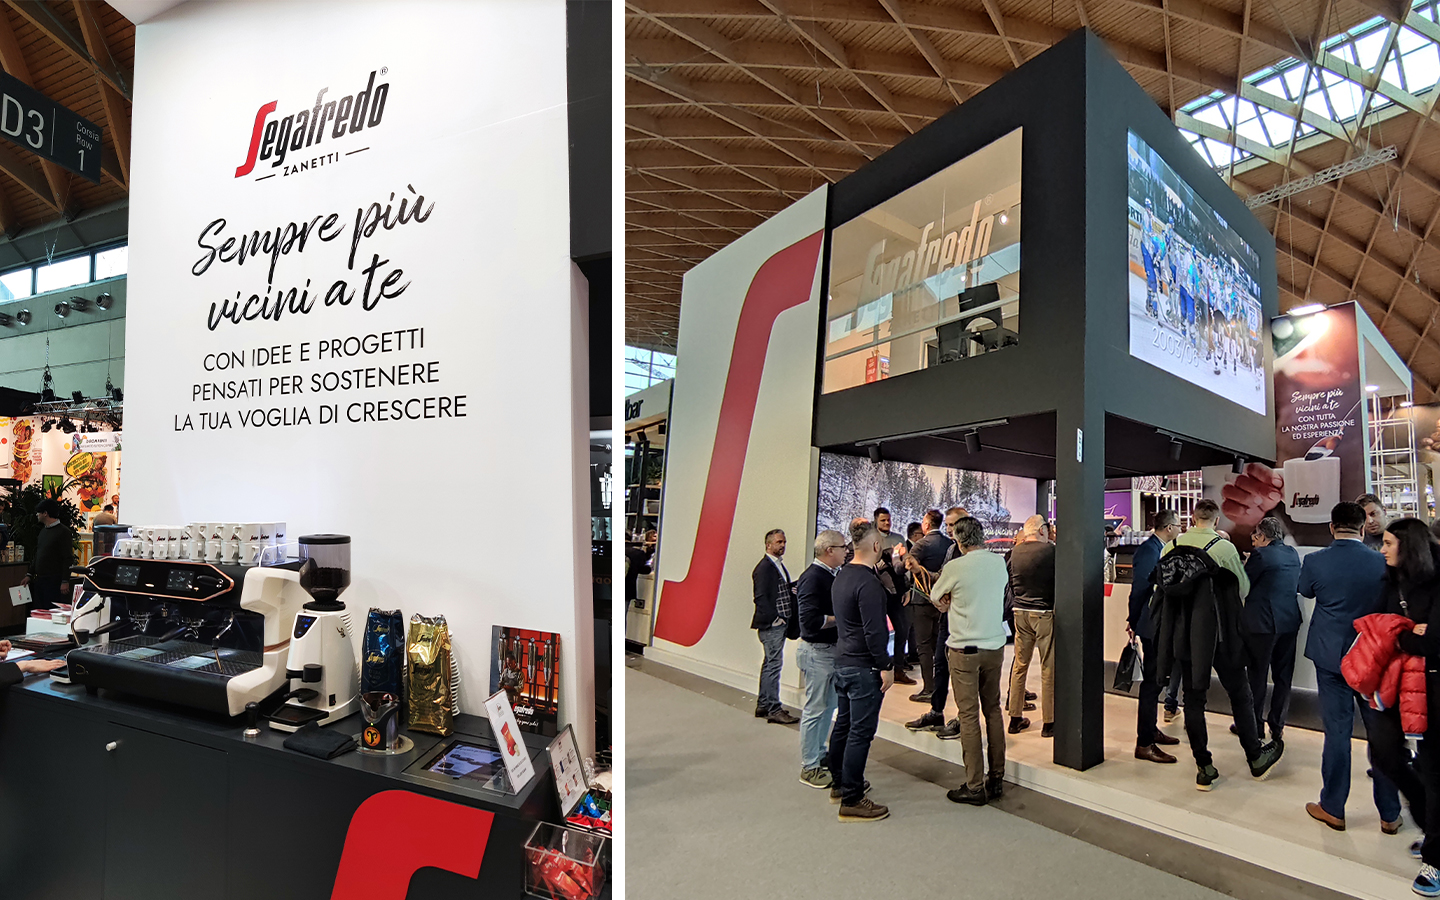 pictures of Segafredo's booth at Sigep featuring graphics by ATC - All Things Communicate